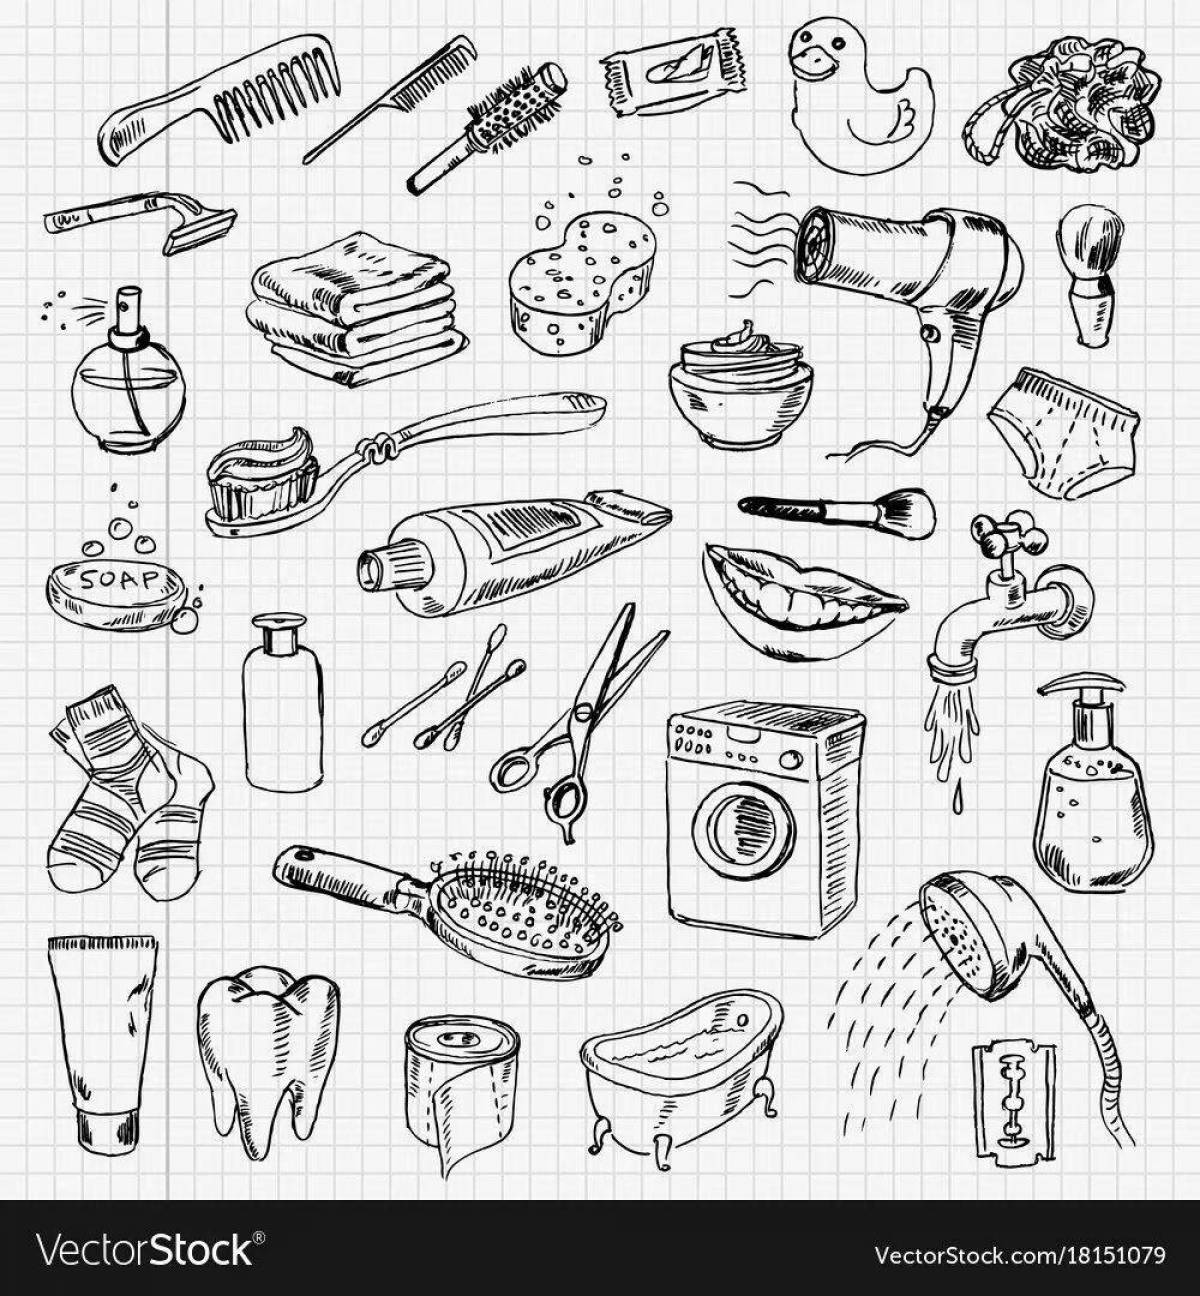 Attractive hygiene products coloring page